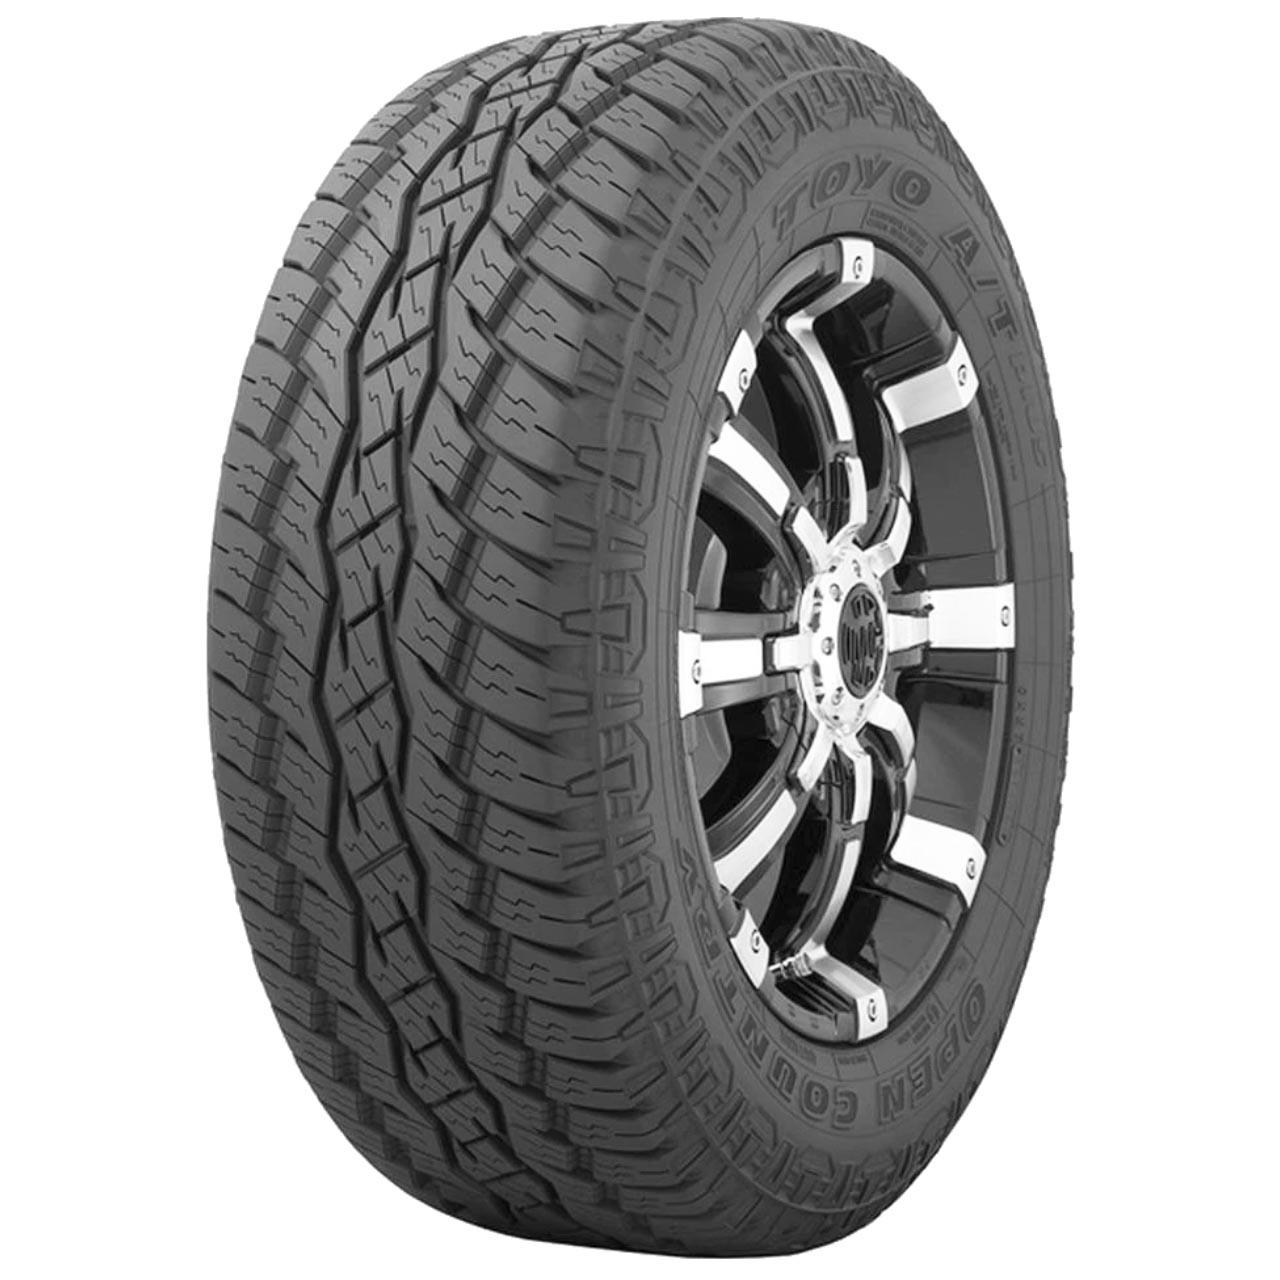 Toyo Open Country AT Plus 265/70R17 115T